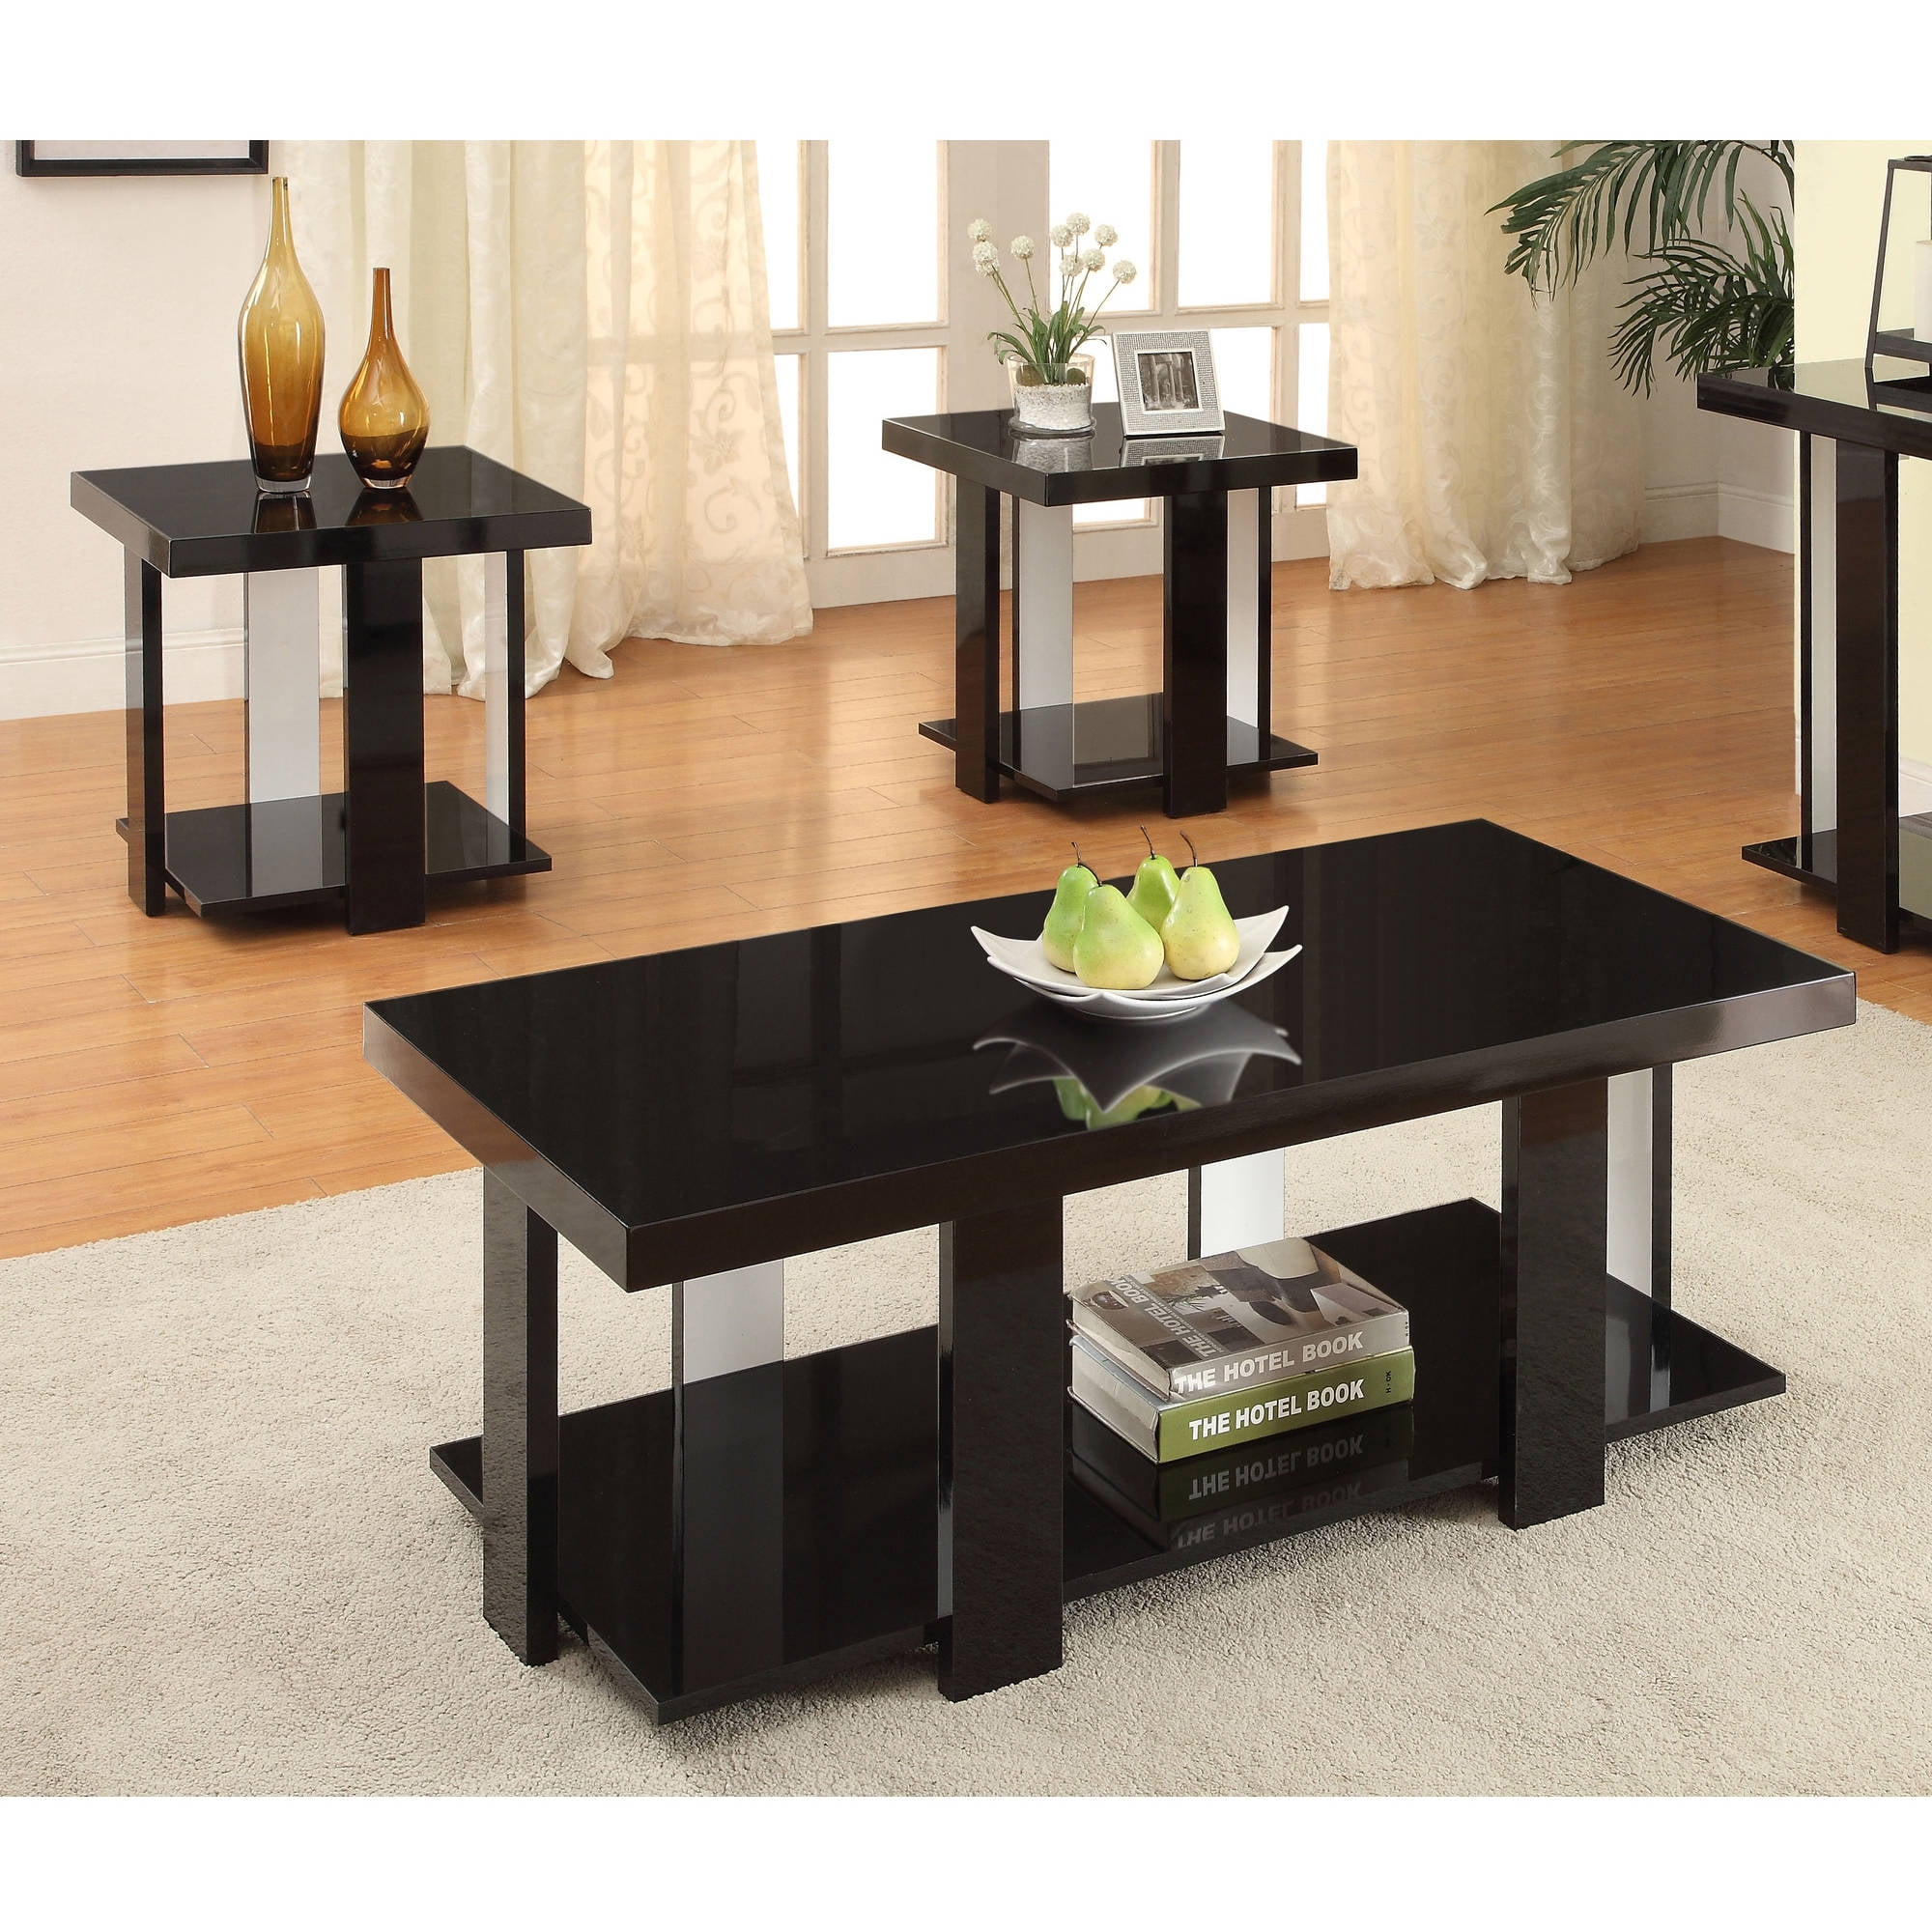 Rankin Contemporary 3-Piece Coffee and End Table Set, Multiple Colors